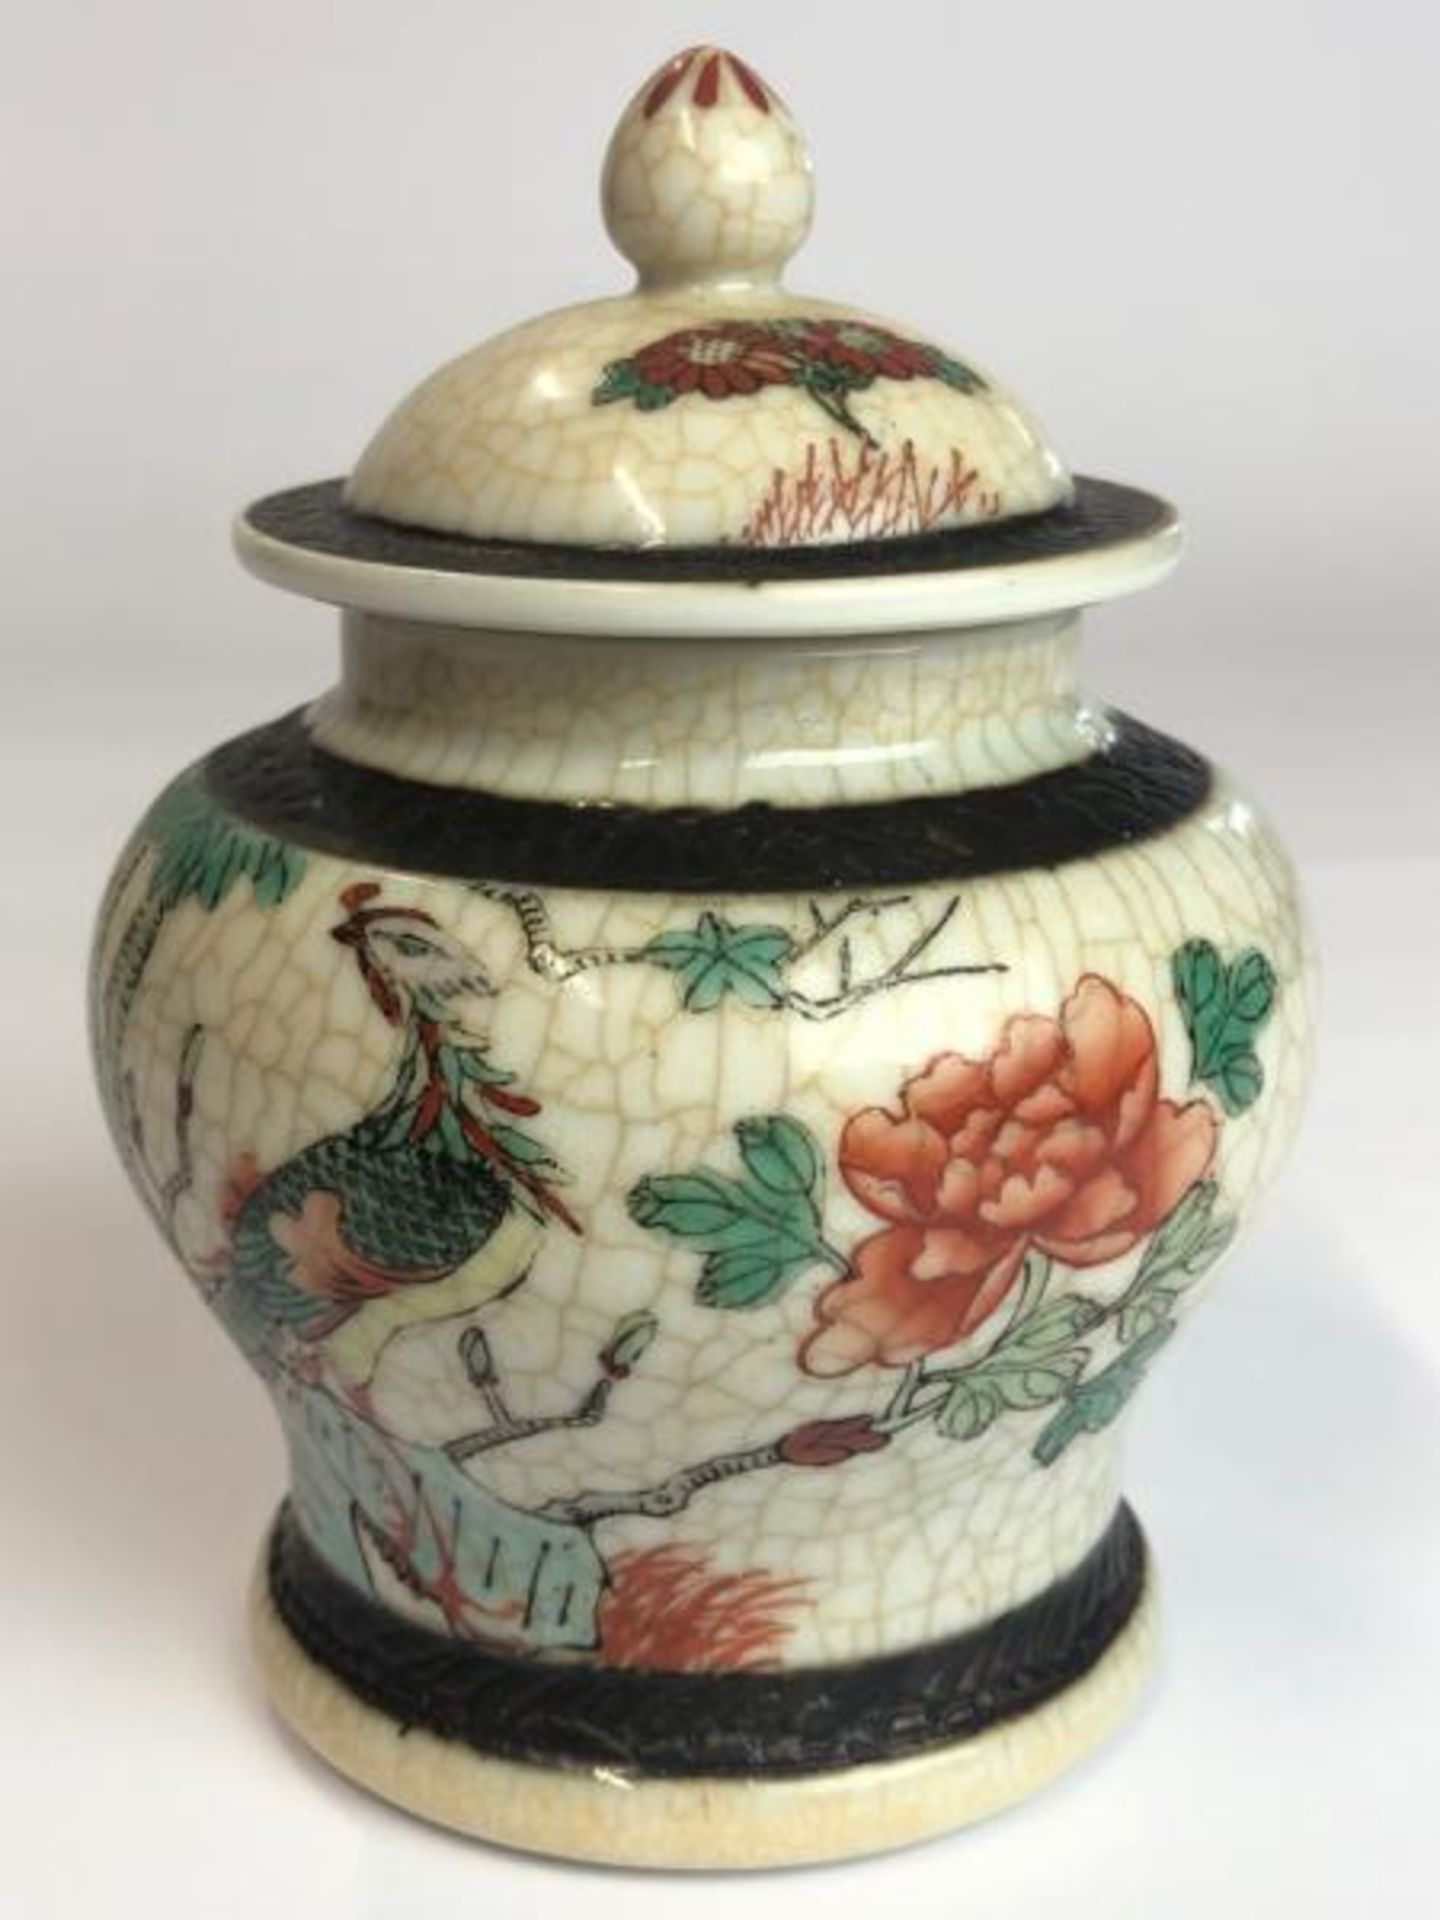 A vintage chinese crackle ware ginger jar with lid, 14cm high with a hand painted crackle ware bowl, - Image 3 of 8